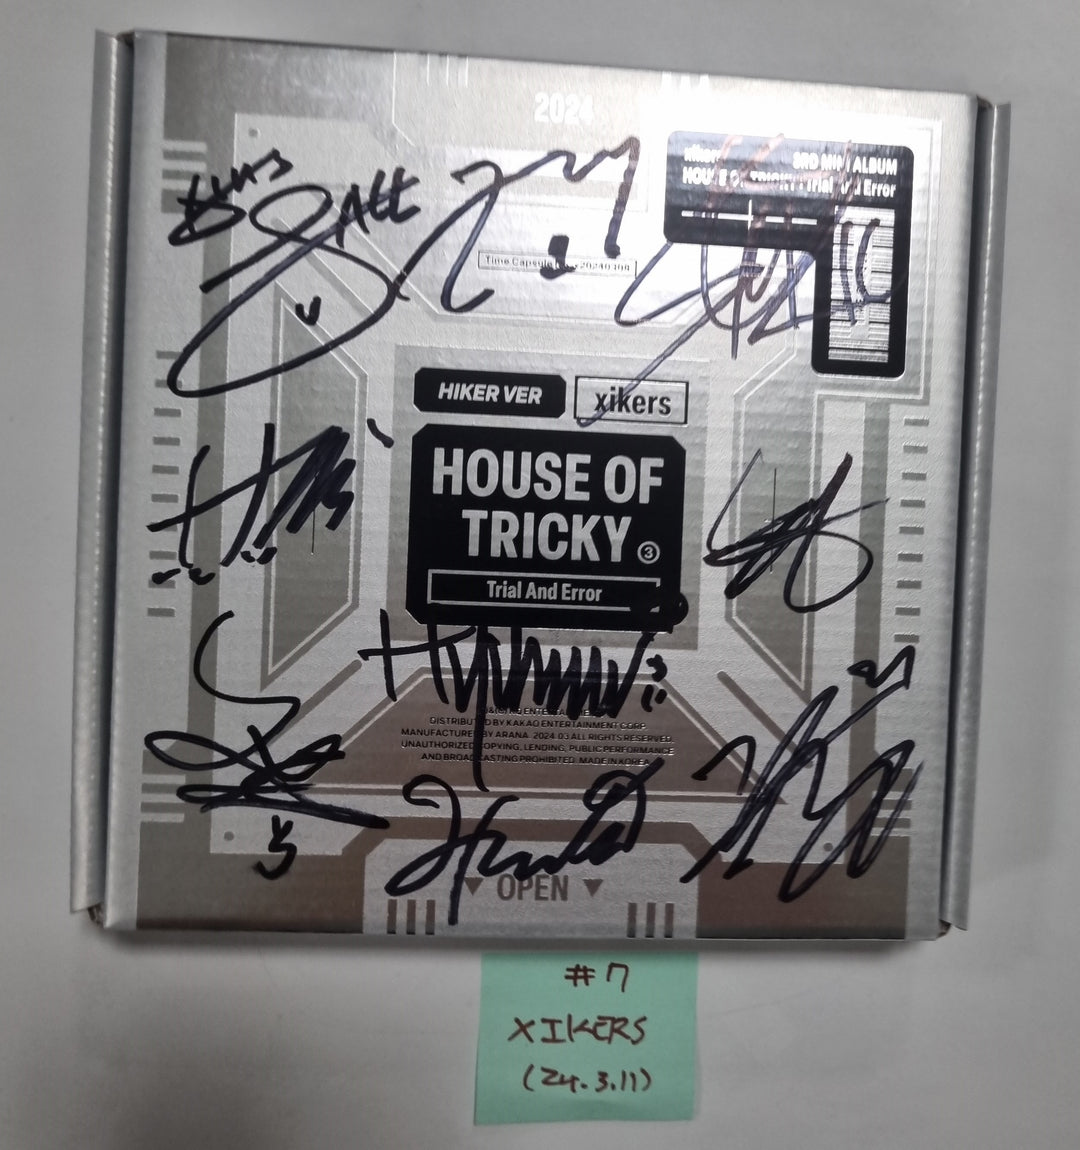 Xikers "HOUSE OF TRICKY : Trial And Error" - Hand Autographed(Signed) Promo Album [24.3.11]